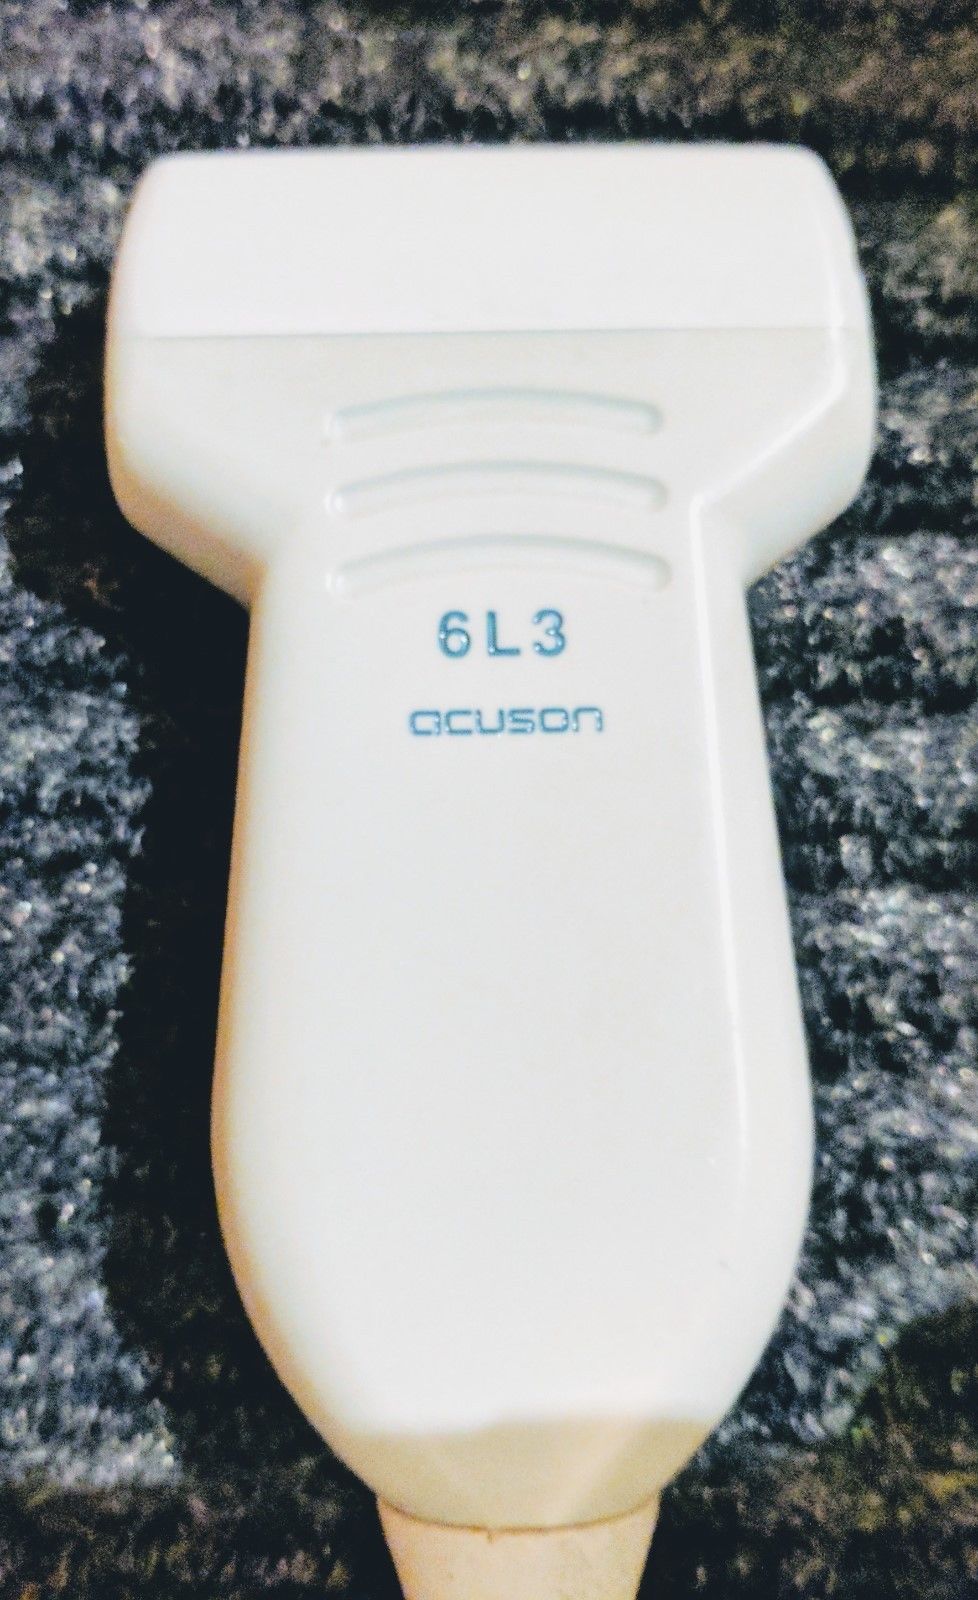 SIEMENS ACUSON 6L3 Ultrasound Transducer Probe in New Hard Carrying Case!!!! DIAGNOSTIC ULTRASOUND MACHINES FOR SALE